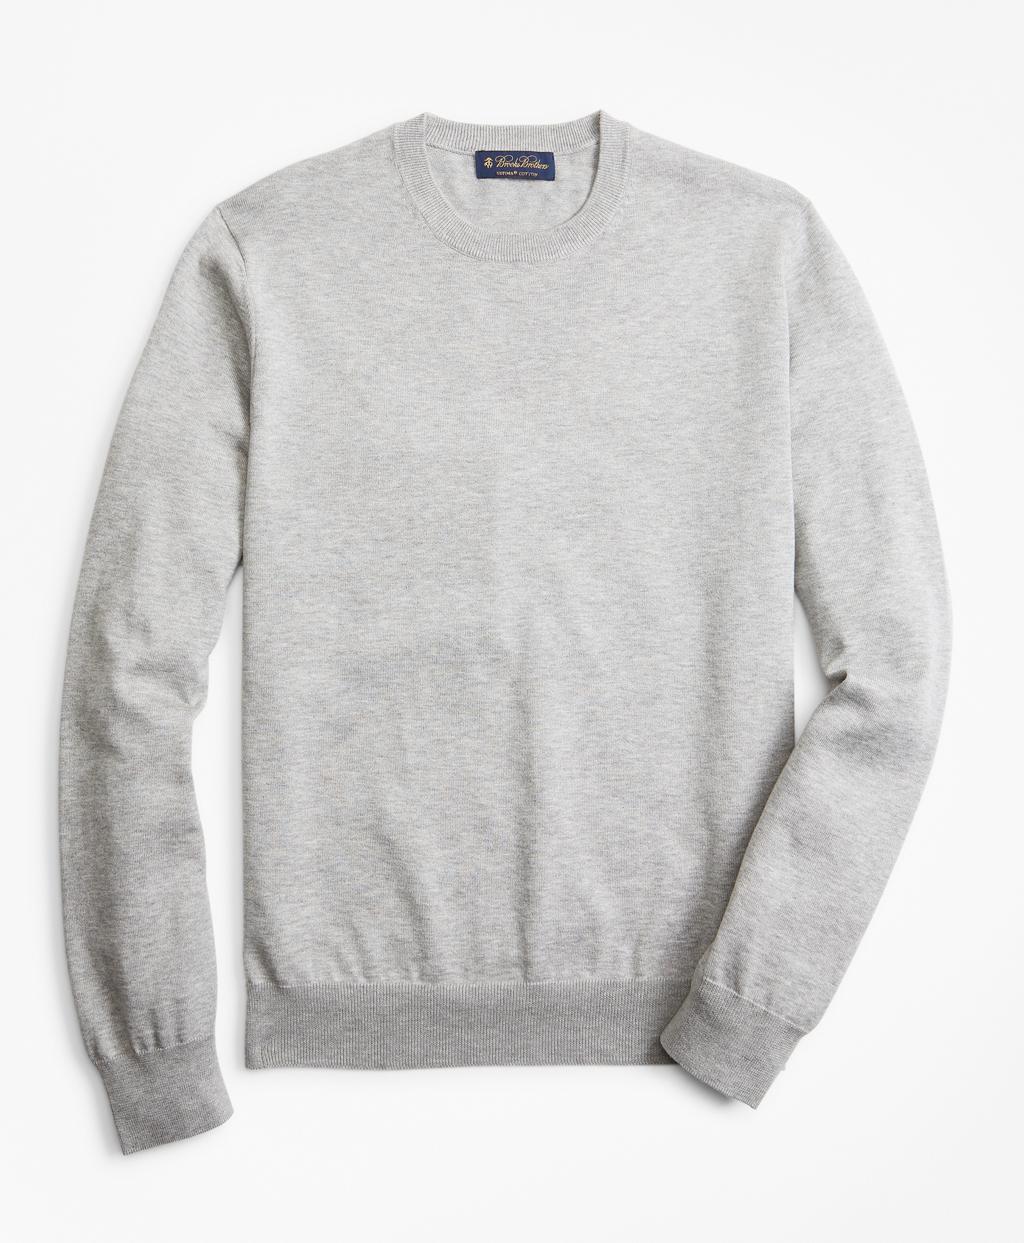 Brooks Brothers Supima Cotton Crewneck Sweater in Gray for Men - Save ...